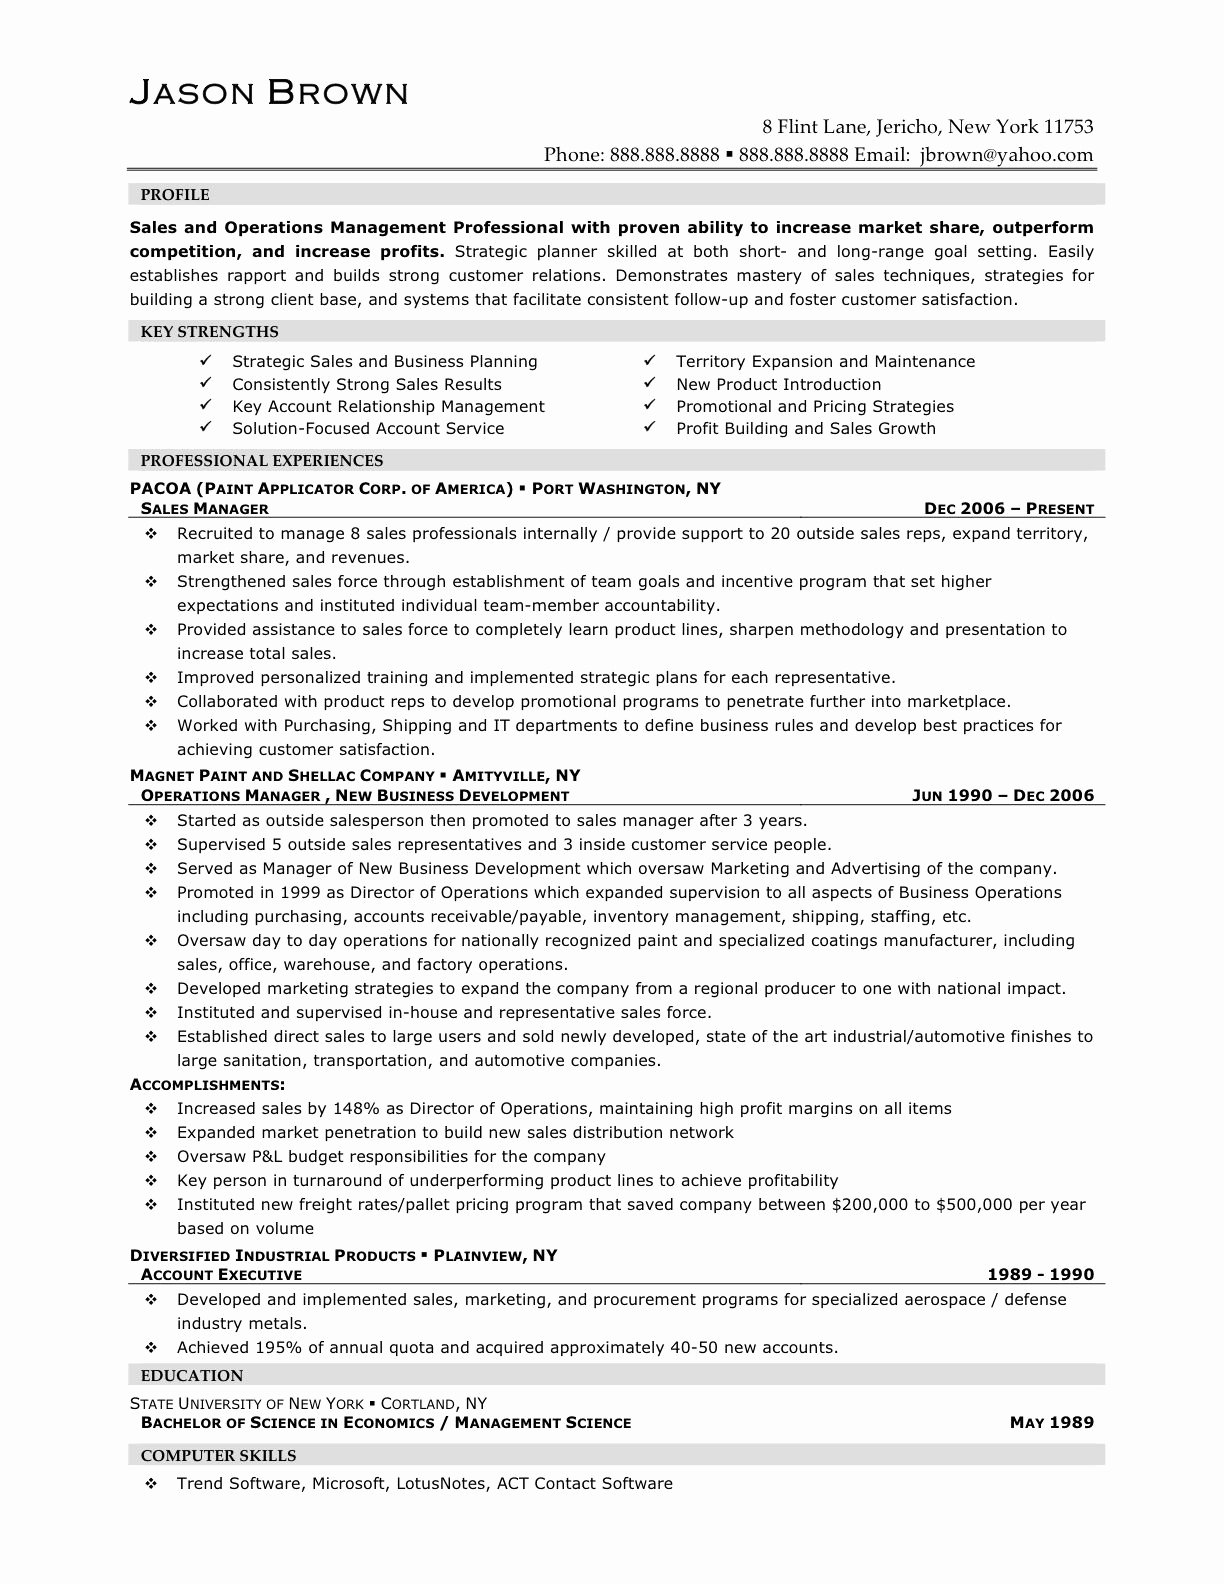 Sales and Marketing Resume Samples New Sales and Marketing Manager Resume Vadditional Information